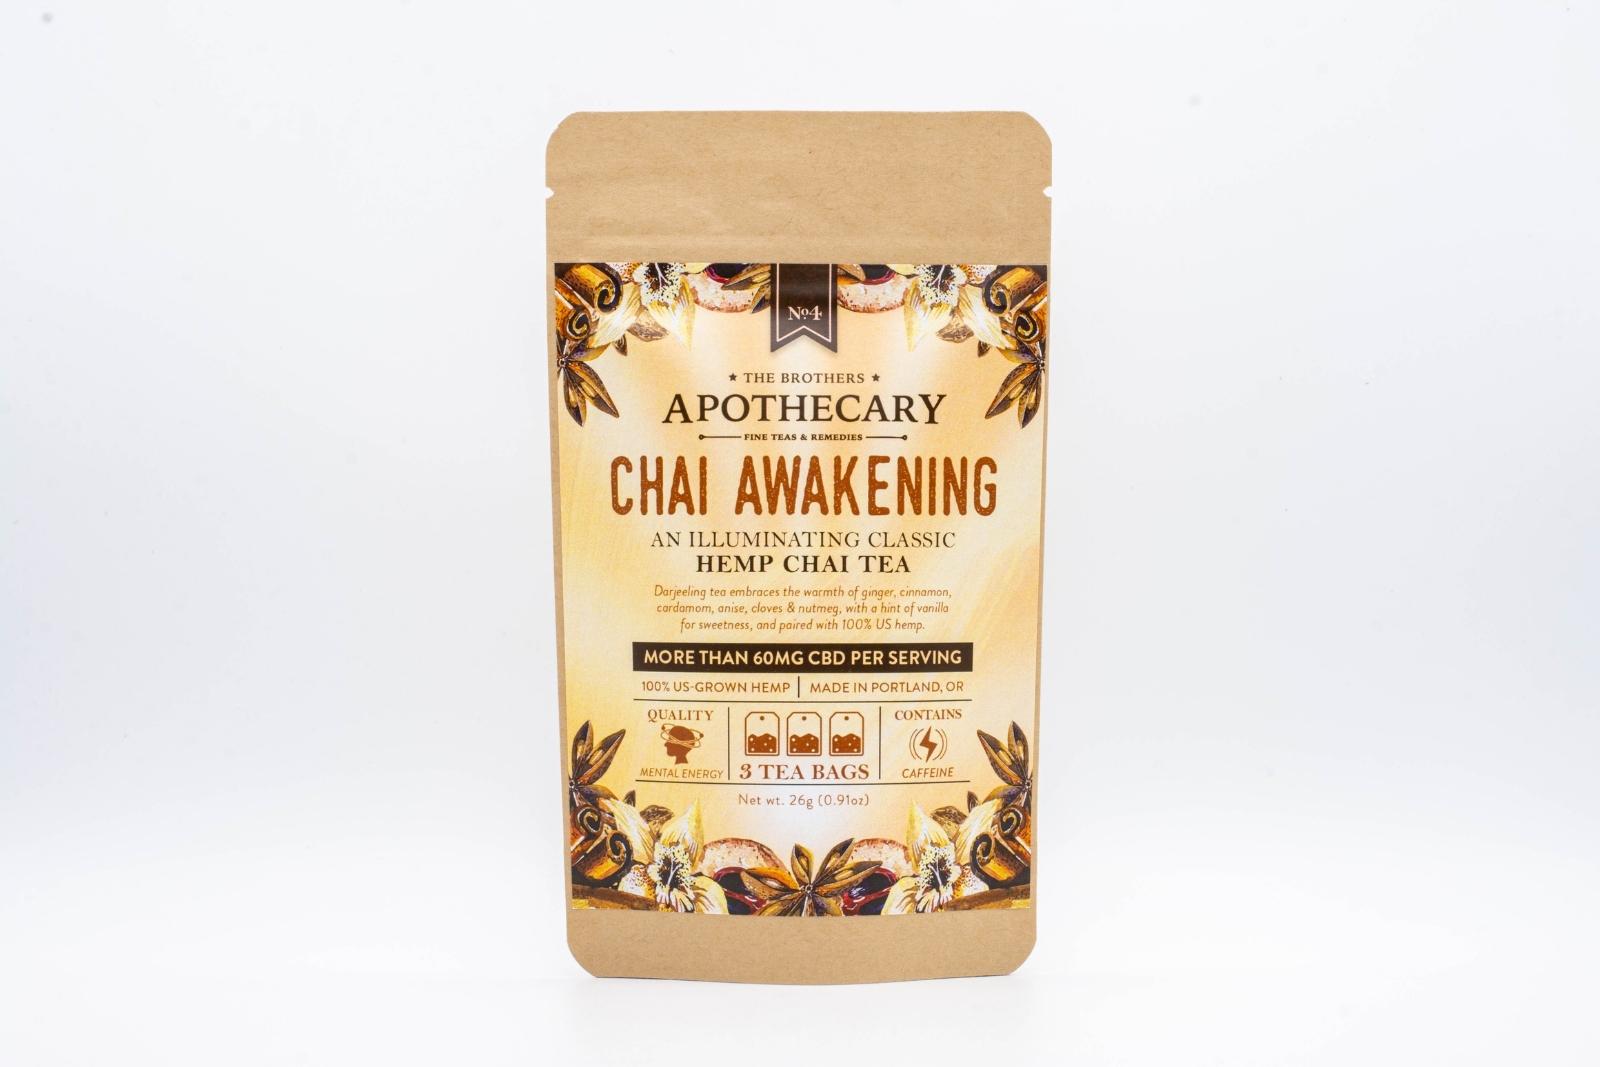 A large packet of The Brothers Apothecary's Chai Awakening CBD Tea on a white background